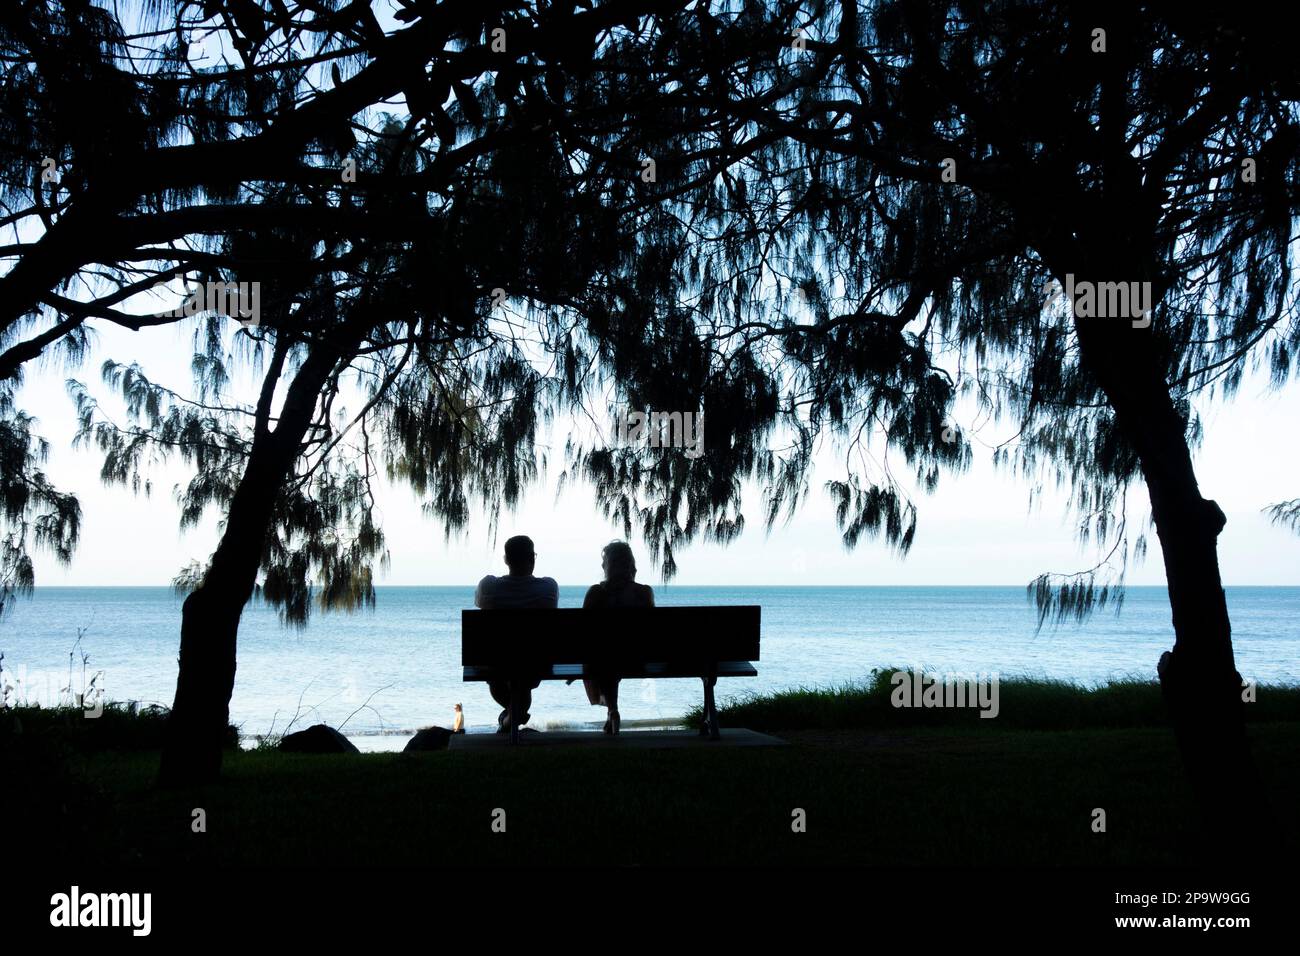 A rear view of a couple sitting on a wooden bench on the shore of Torquay beach, Hervey Bay, Queensland, Australia Stock Photo